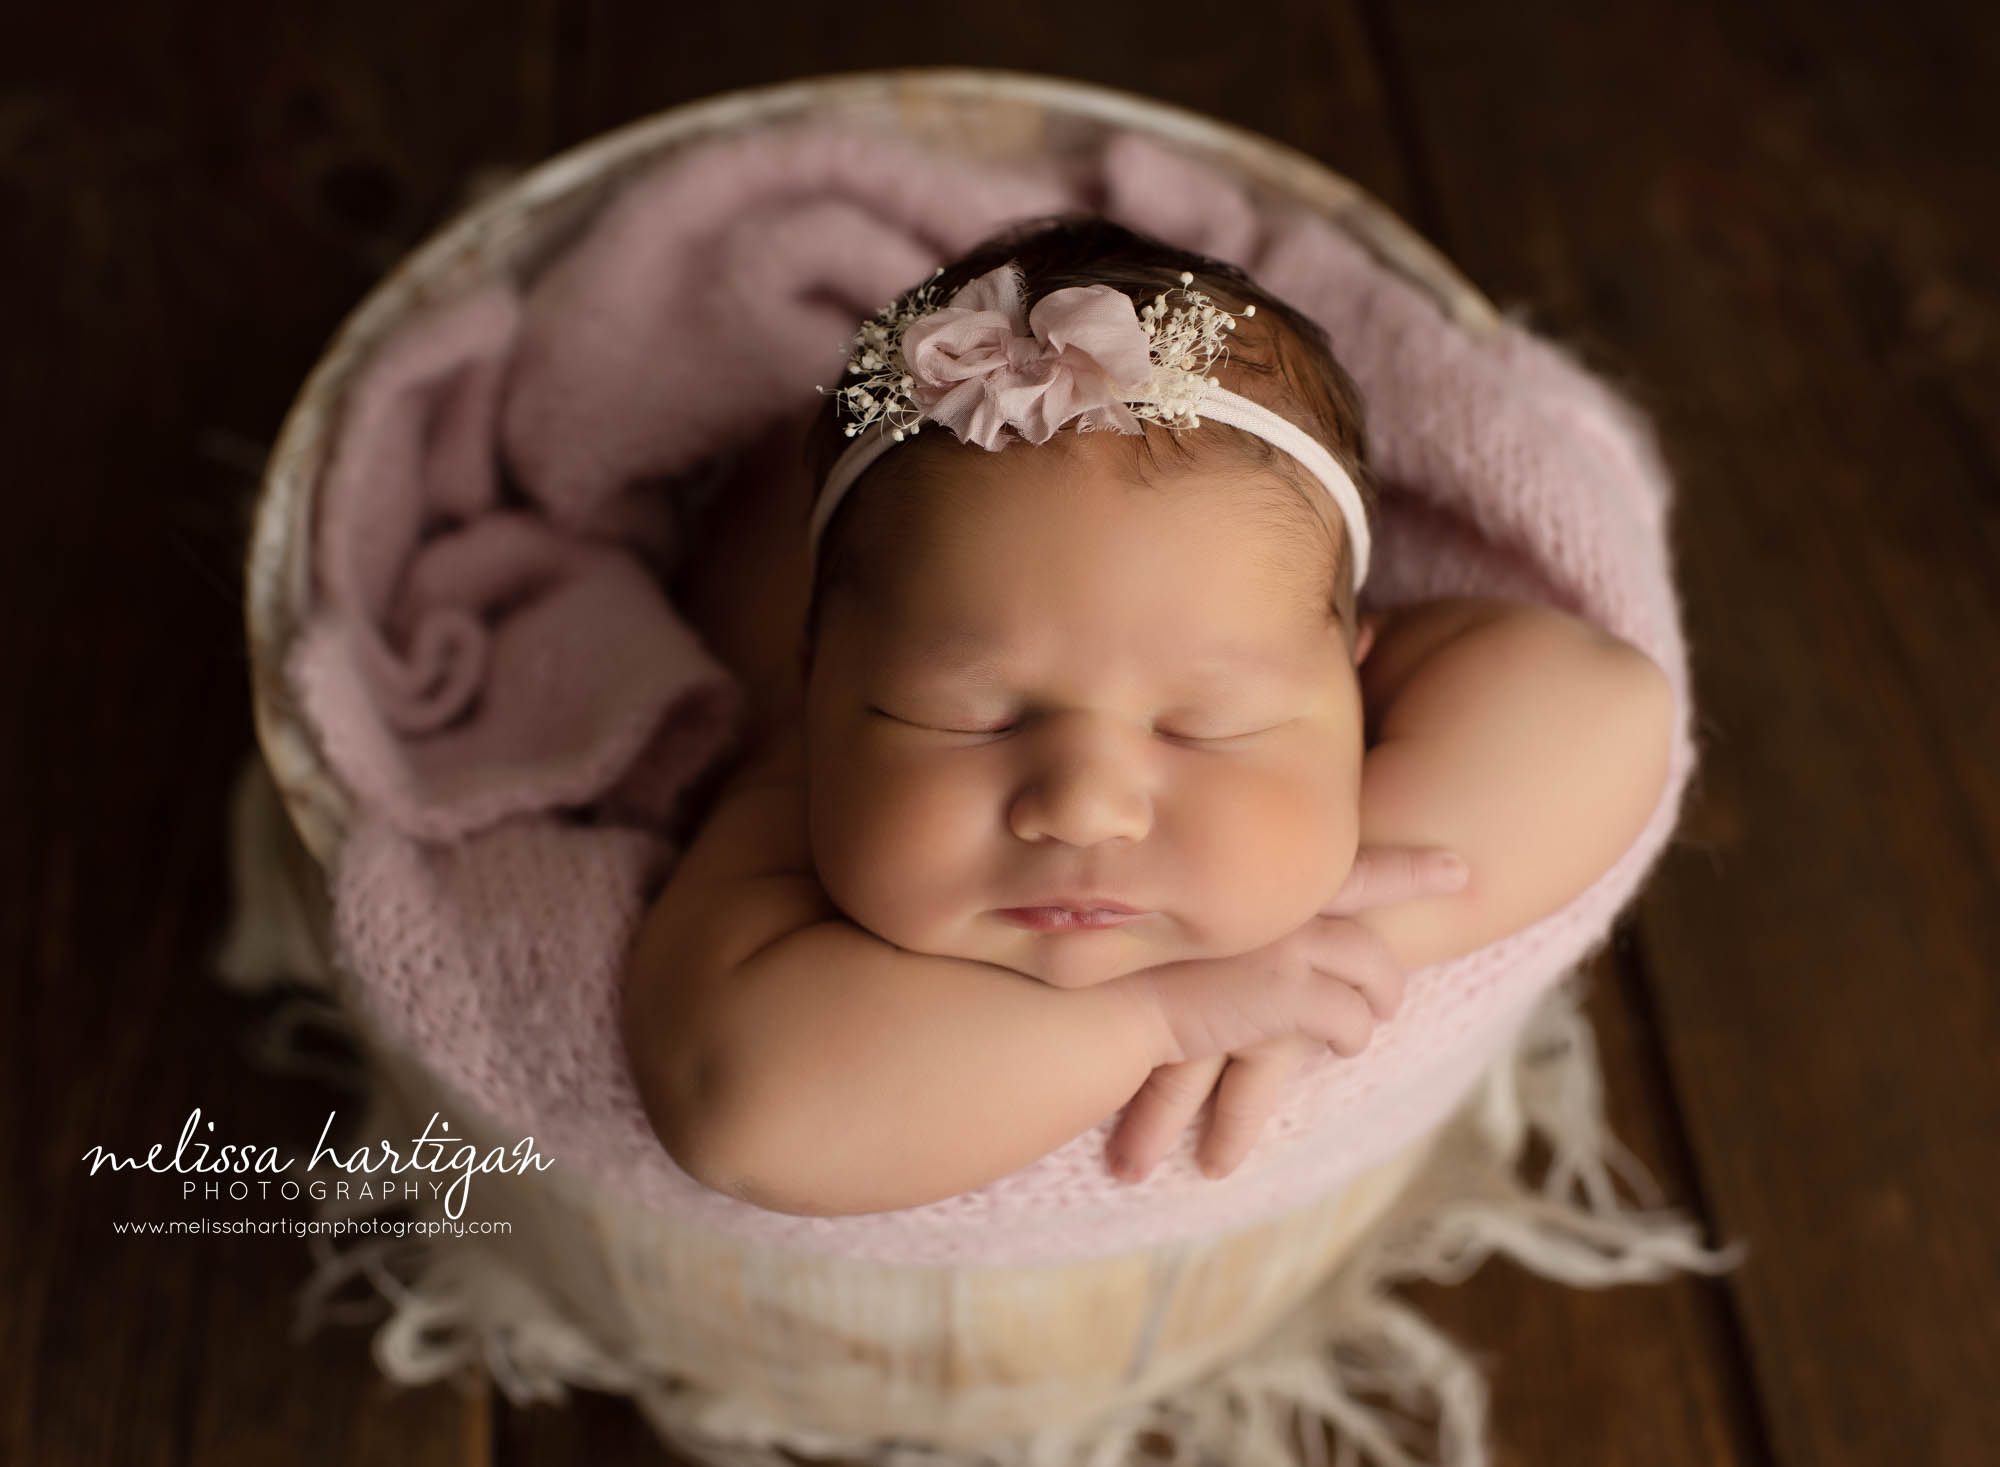 newborn baby girl posed in wooden bucket with pink layer wrap and flower headband